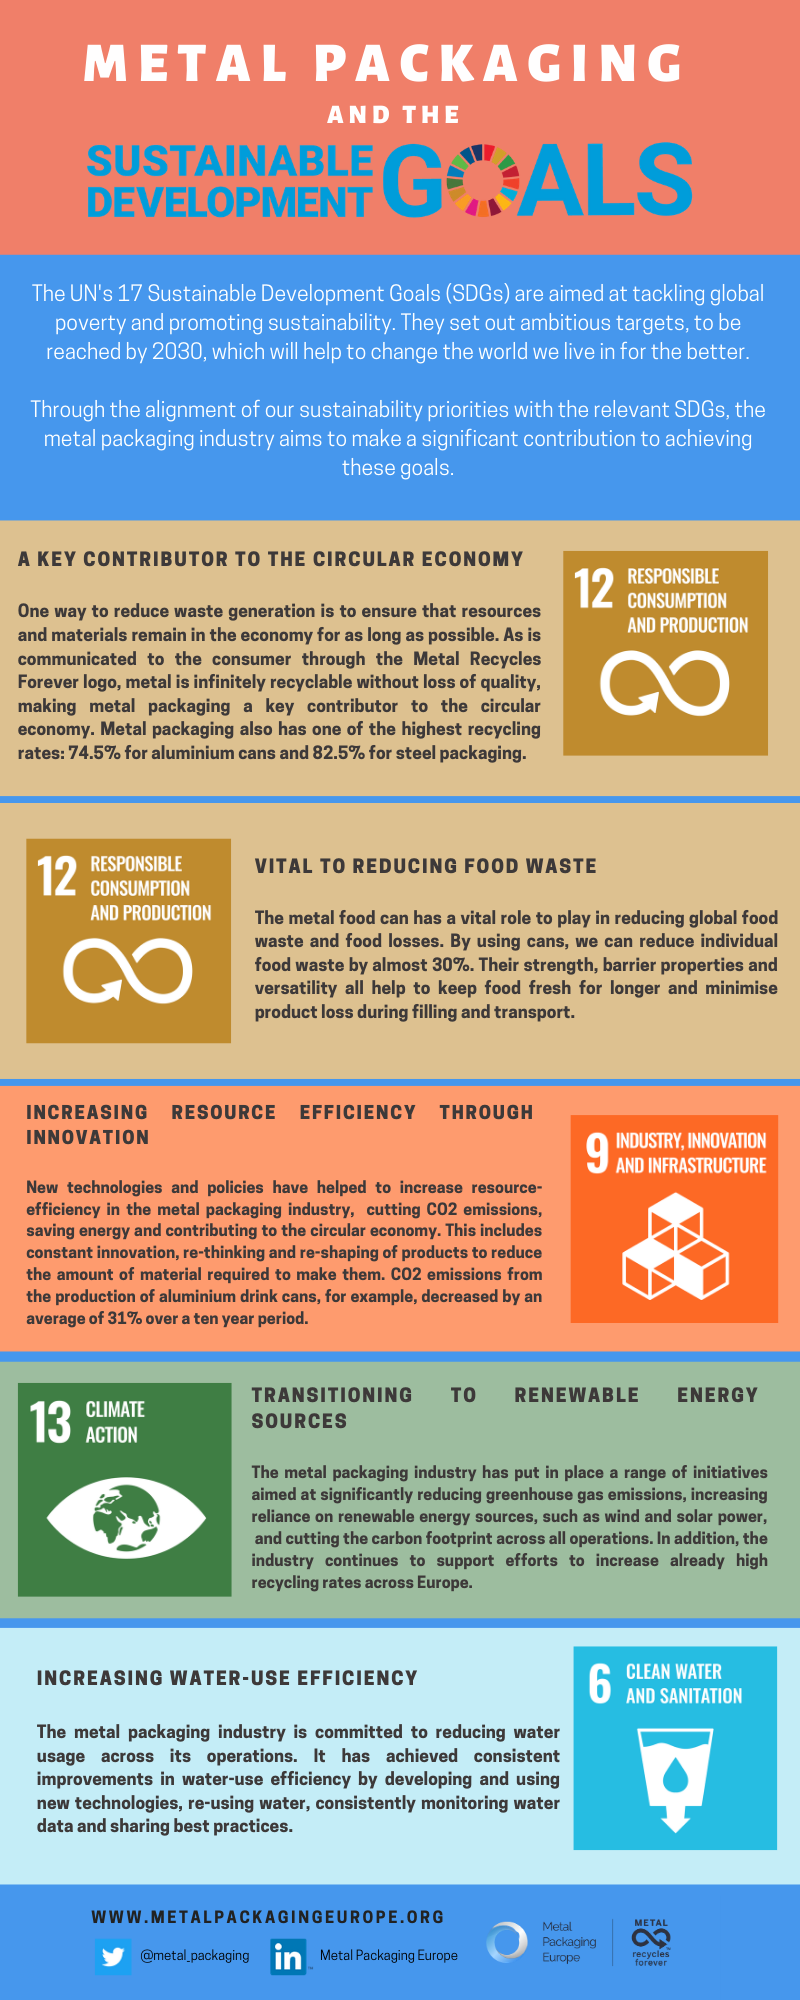 Metal Packaging and the Sustainable Development Goals